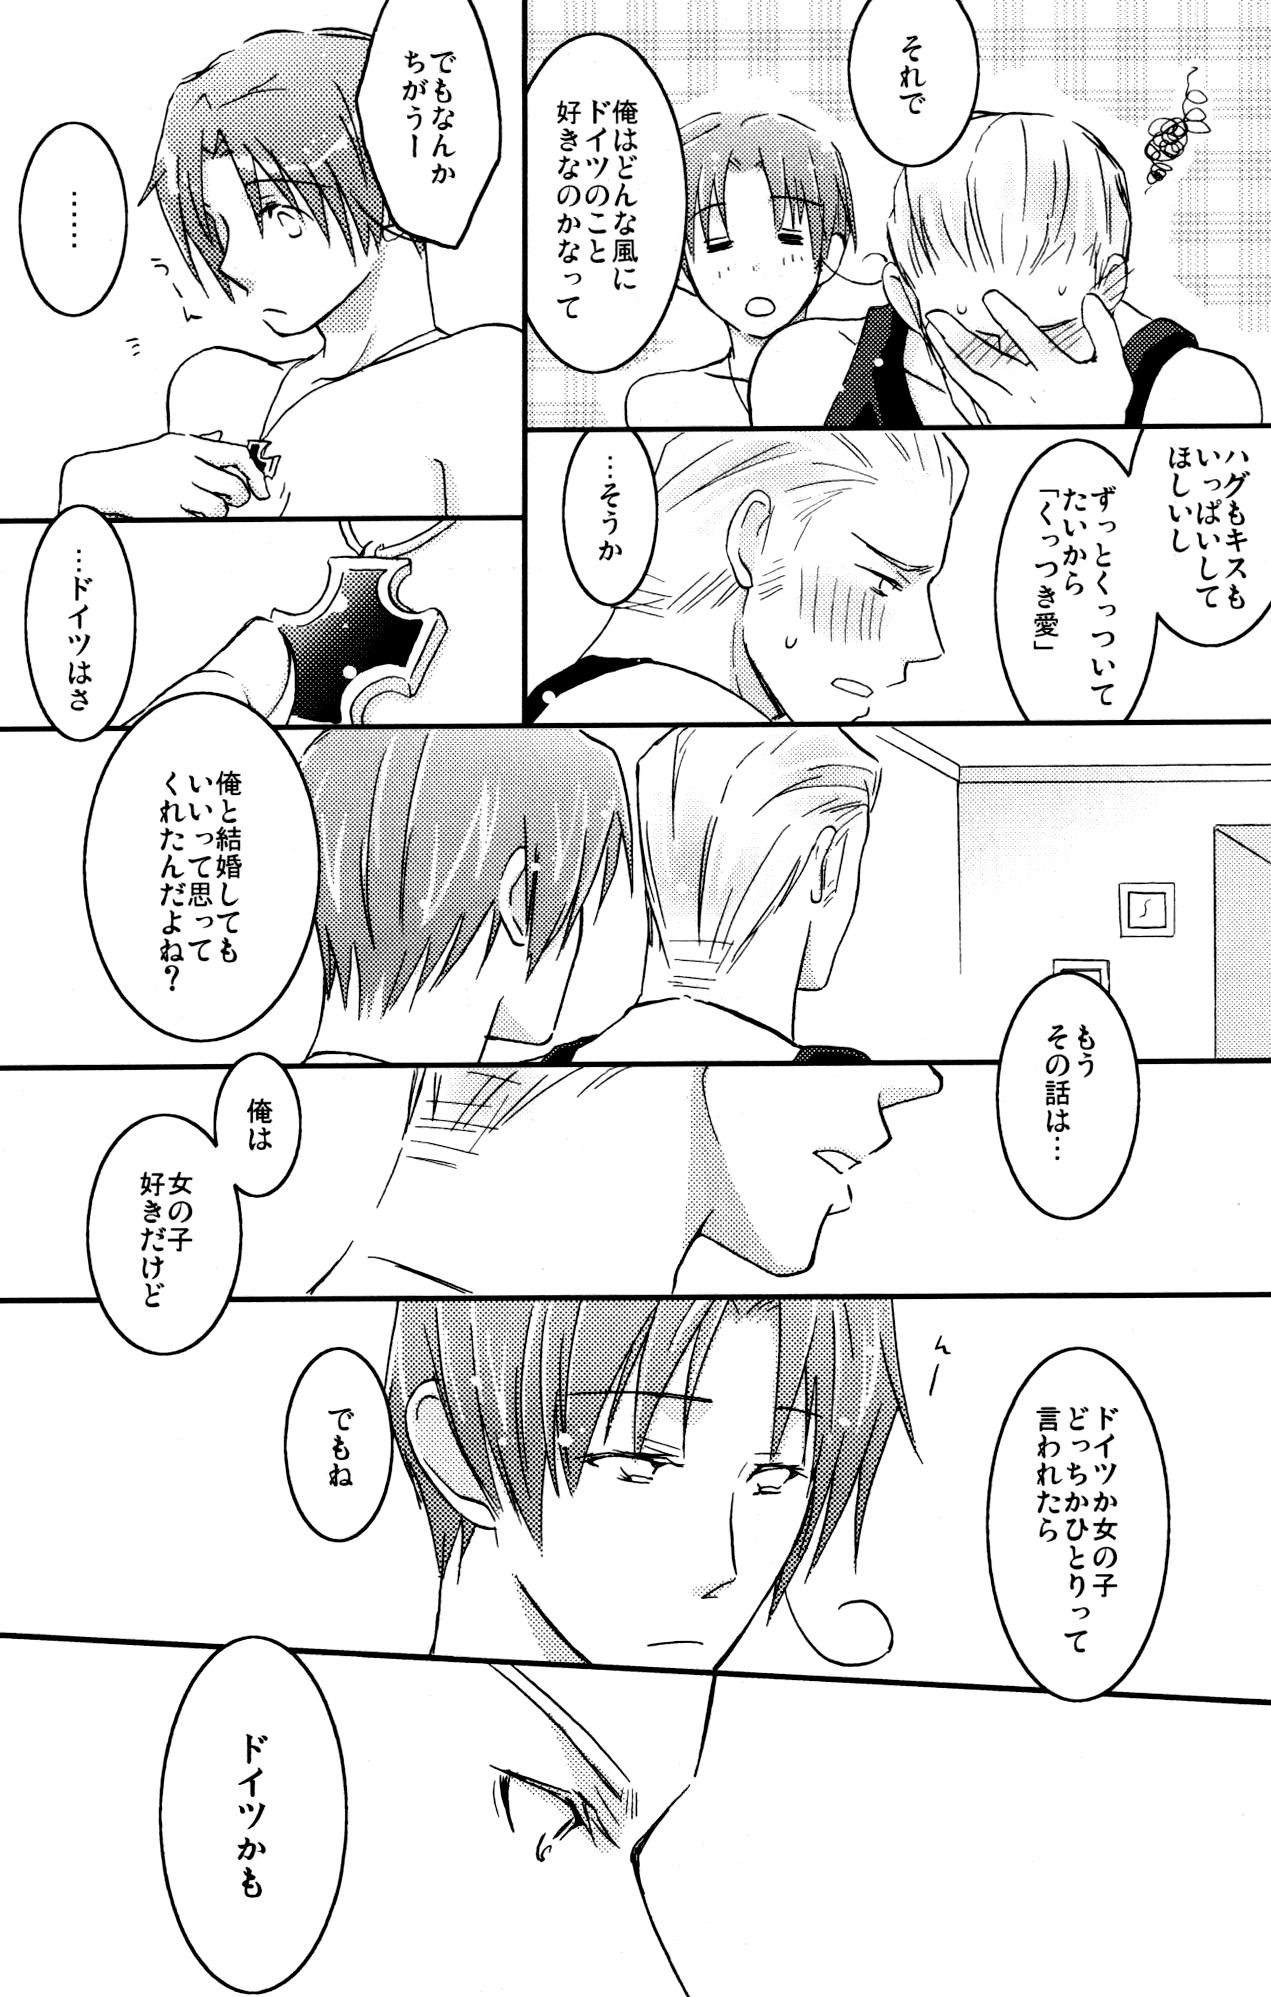 Amatuer STAMP vol.6 - Axis powers hetalia Livecam - Page 4